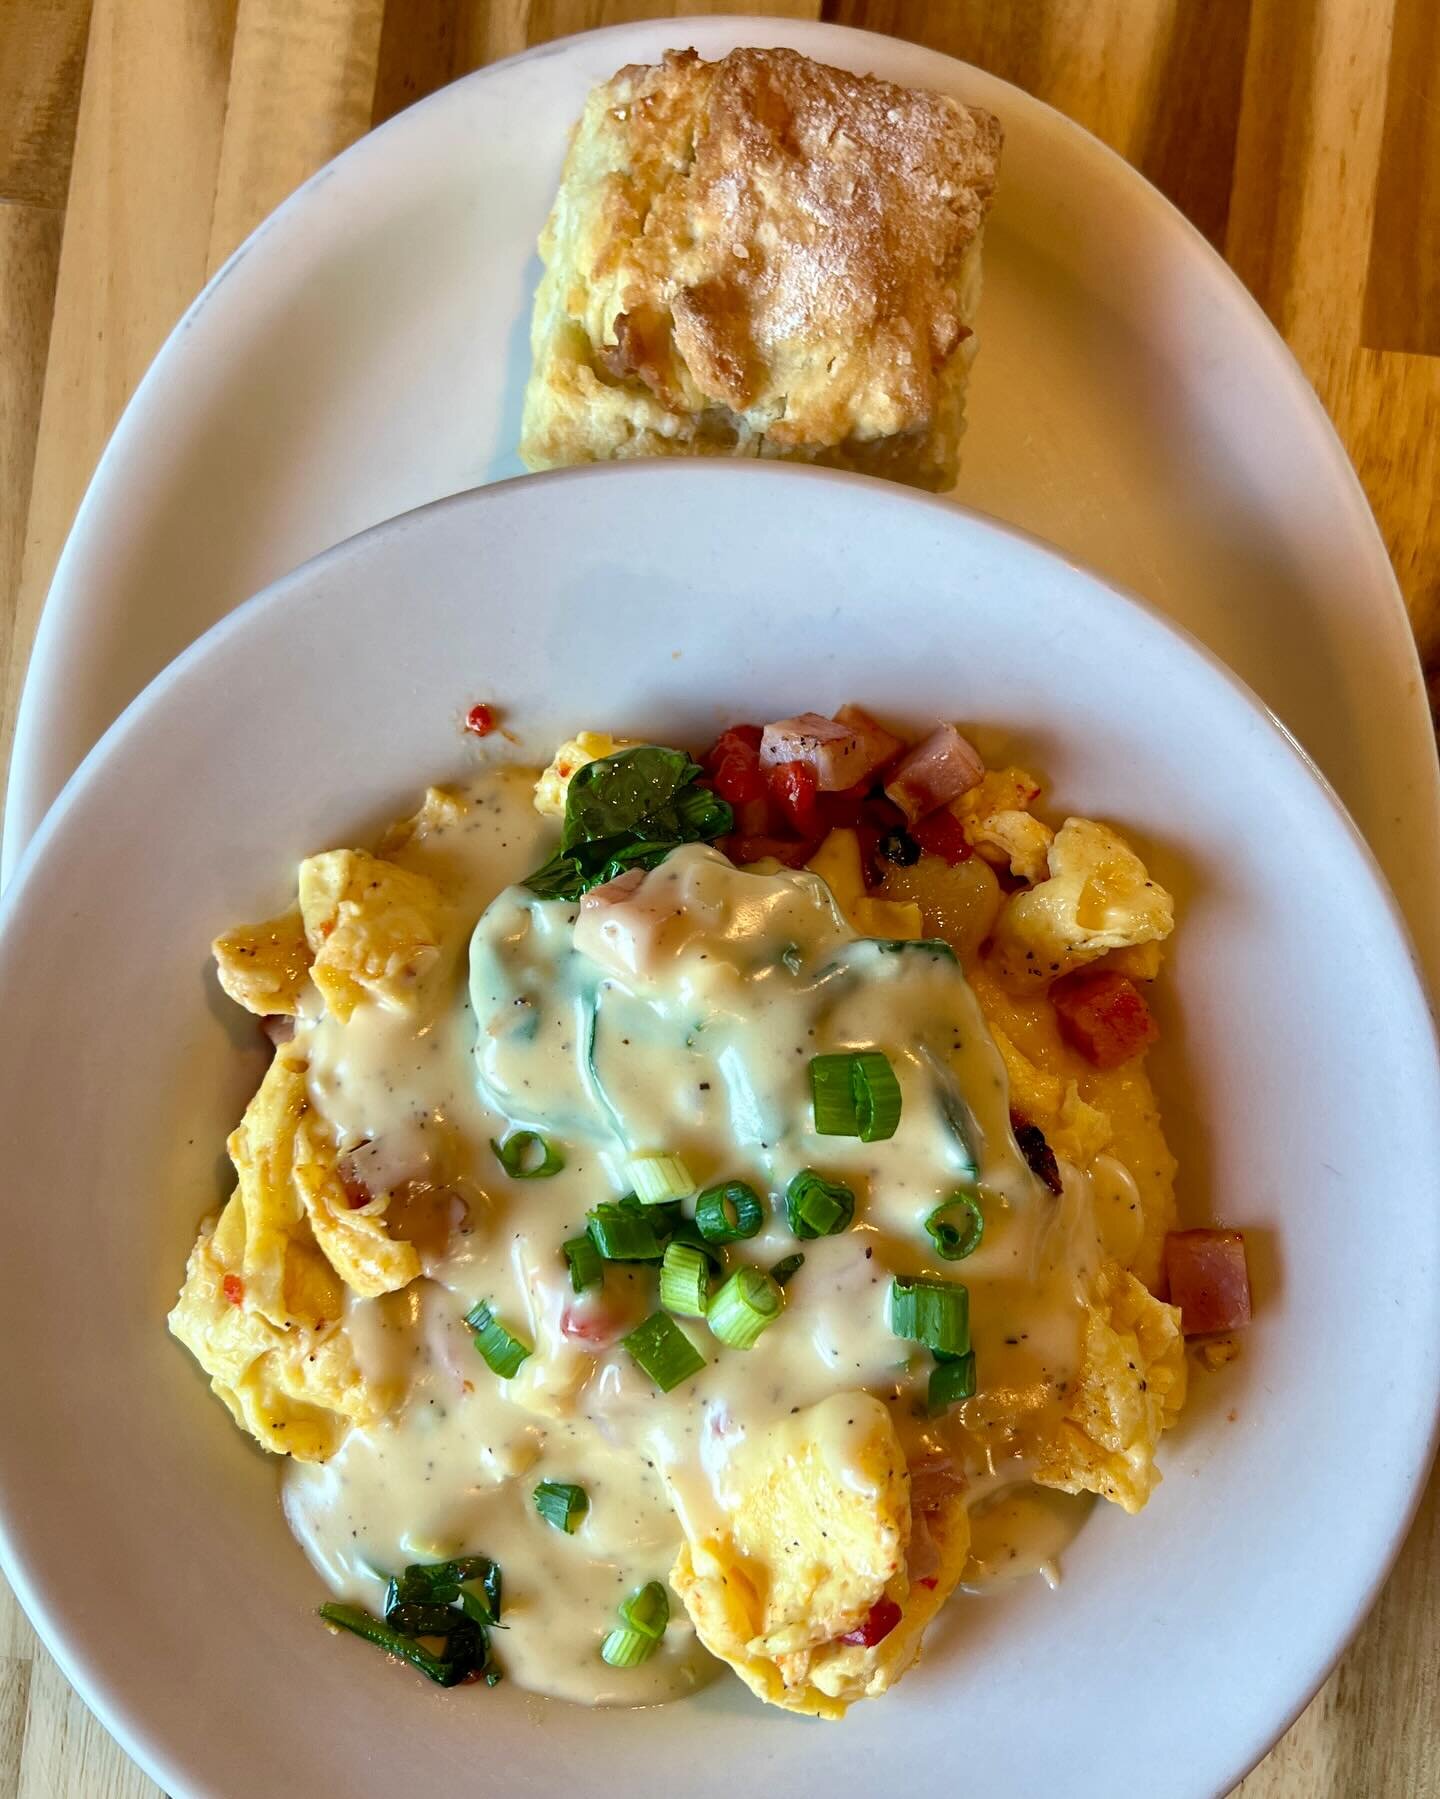 Top of the morning to y&rsquo;all! Today we are tempting you with a two egg scramble with Canadian bacon, spinach, roasted garlic, and roasted red bell peppers served over potato cakes or cheese grits and then topped with a cheddar cheese sauce and g